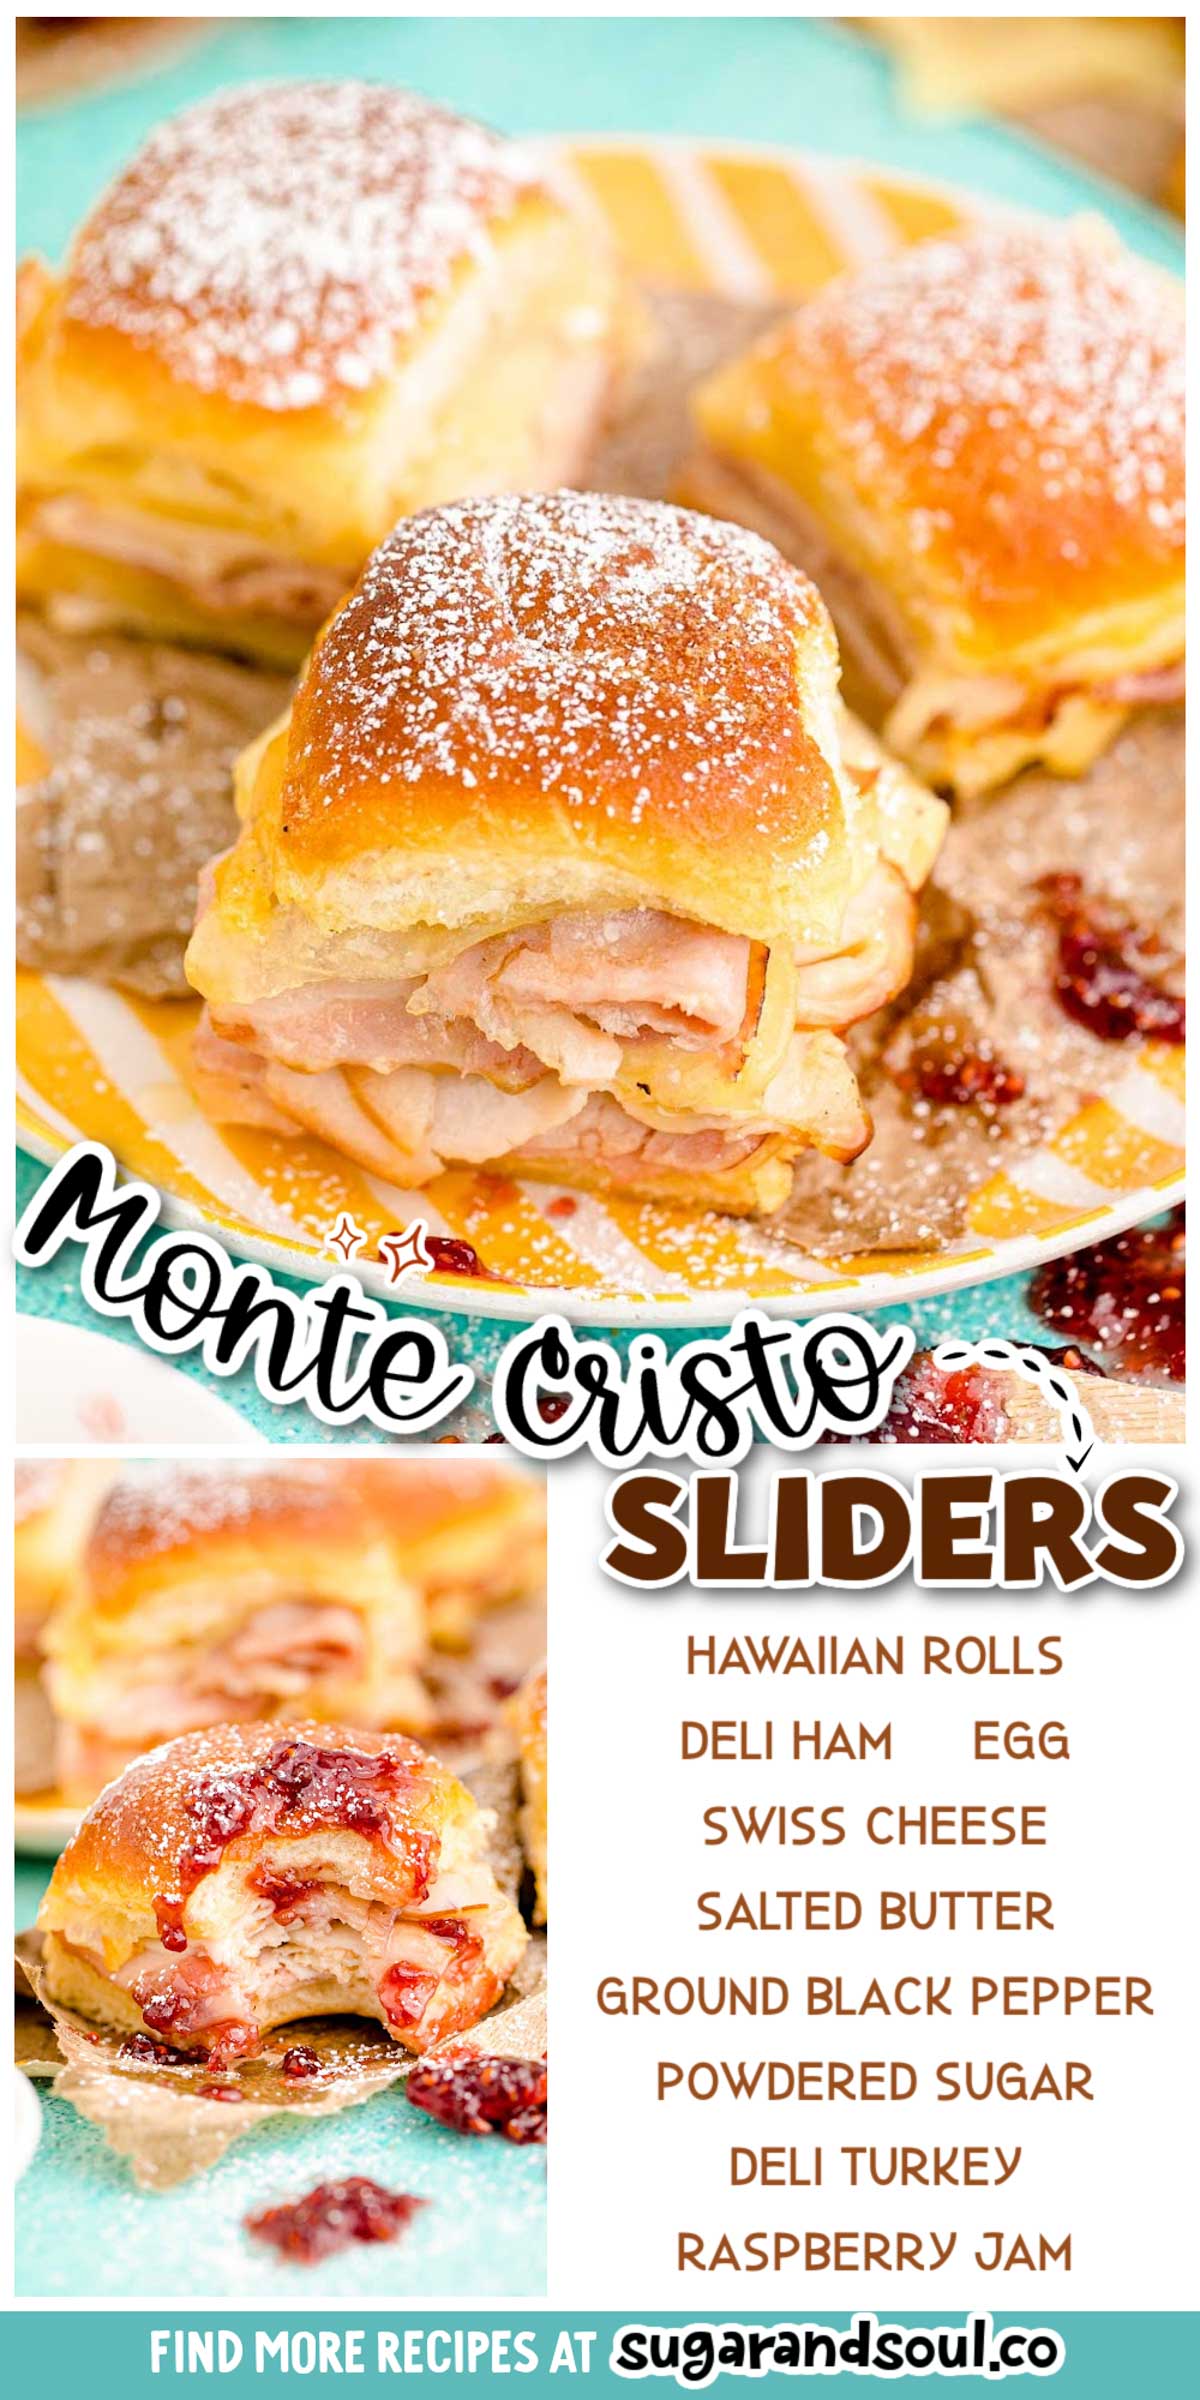 Monte Cristo Sliders are an easy and delicious baked breakfast option that layers ham, turkey, and cheese onto Hawaiian sweet rolls! Hits the breakfast table to feed your loved ones in under an hour! via @sugarandsoulco